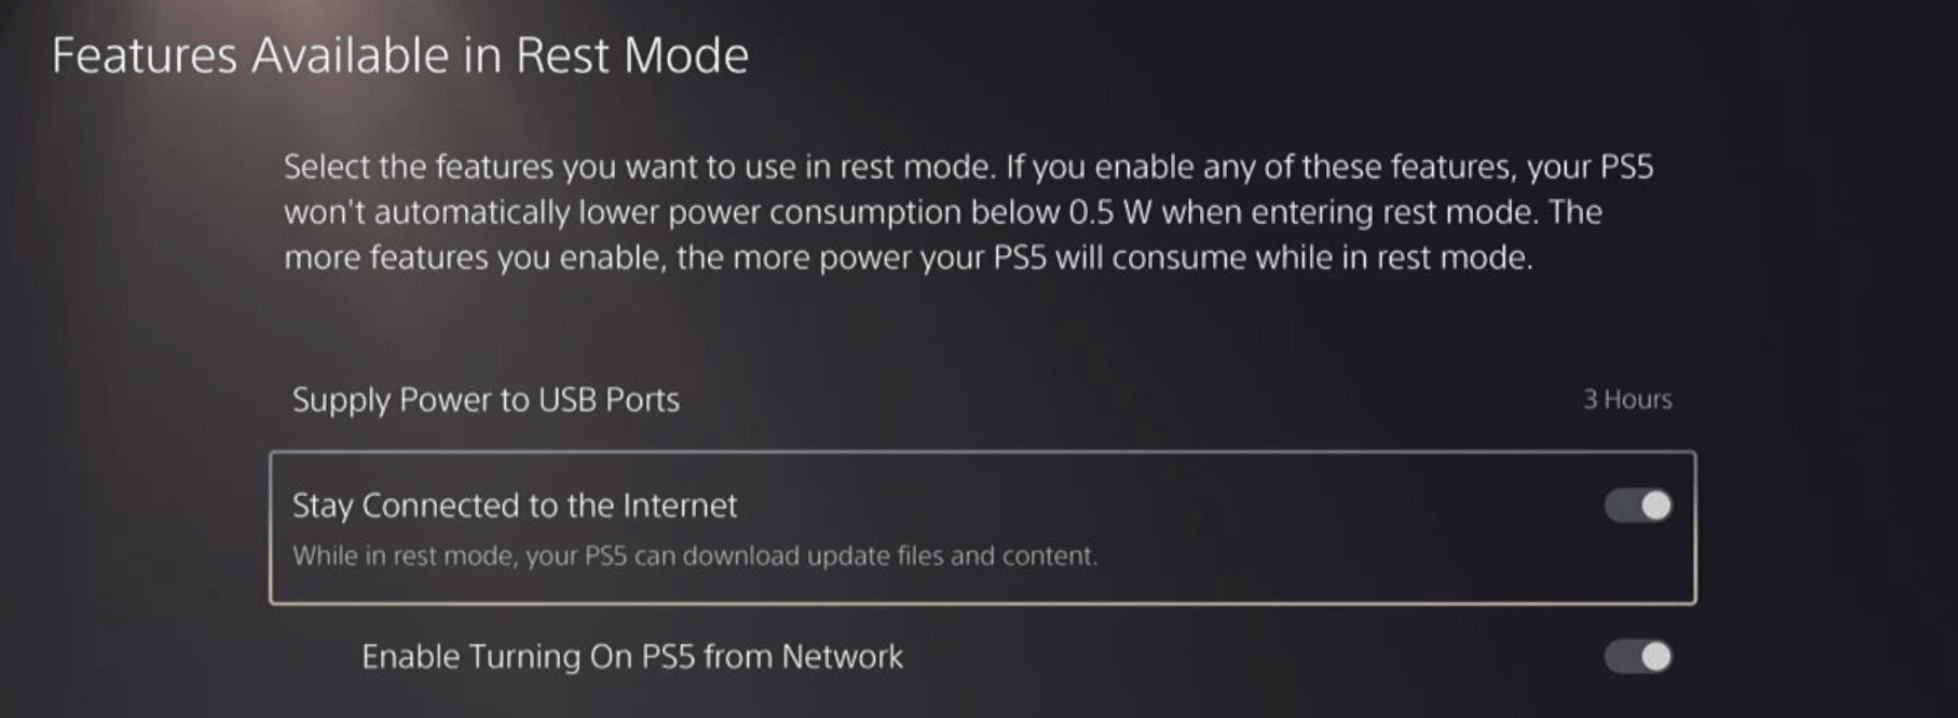 Stay Connected to the Internet is toggled in PS5 rest mode settings menu to enable automatic updates of Hades